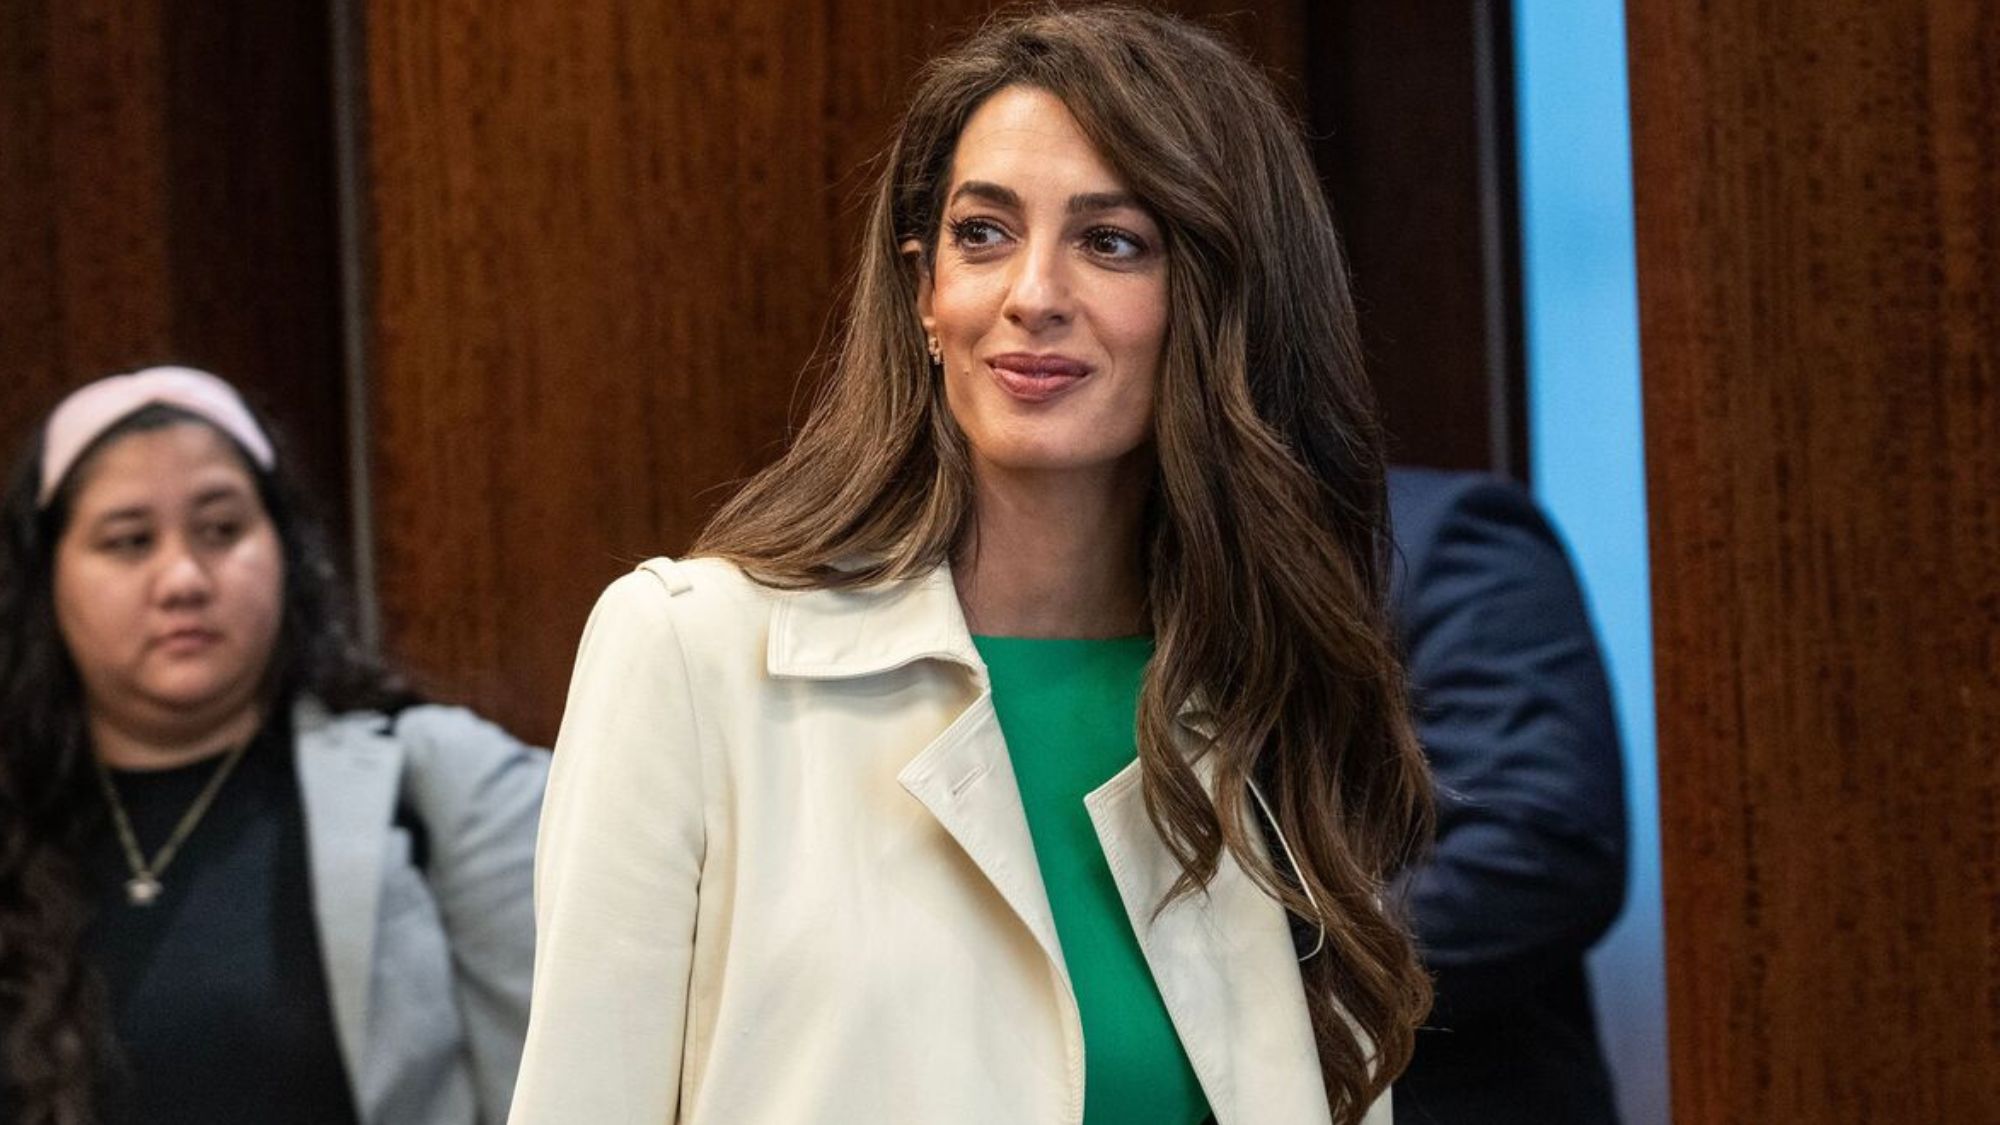 Amal Clooney Security Issues: A Lawyer’s Life Under Lockdown